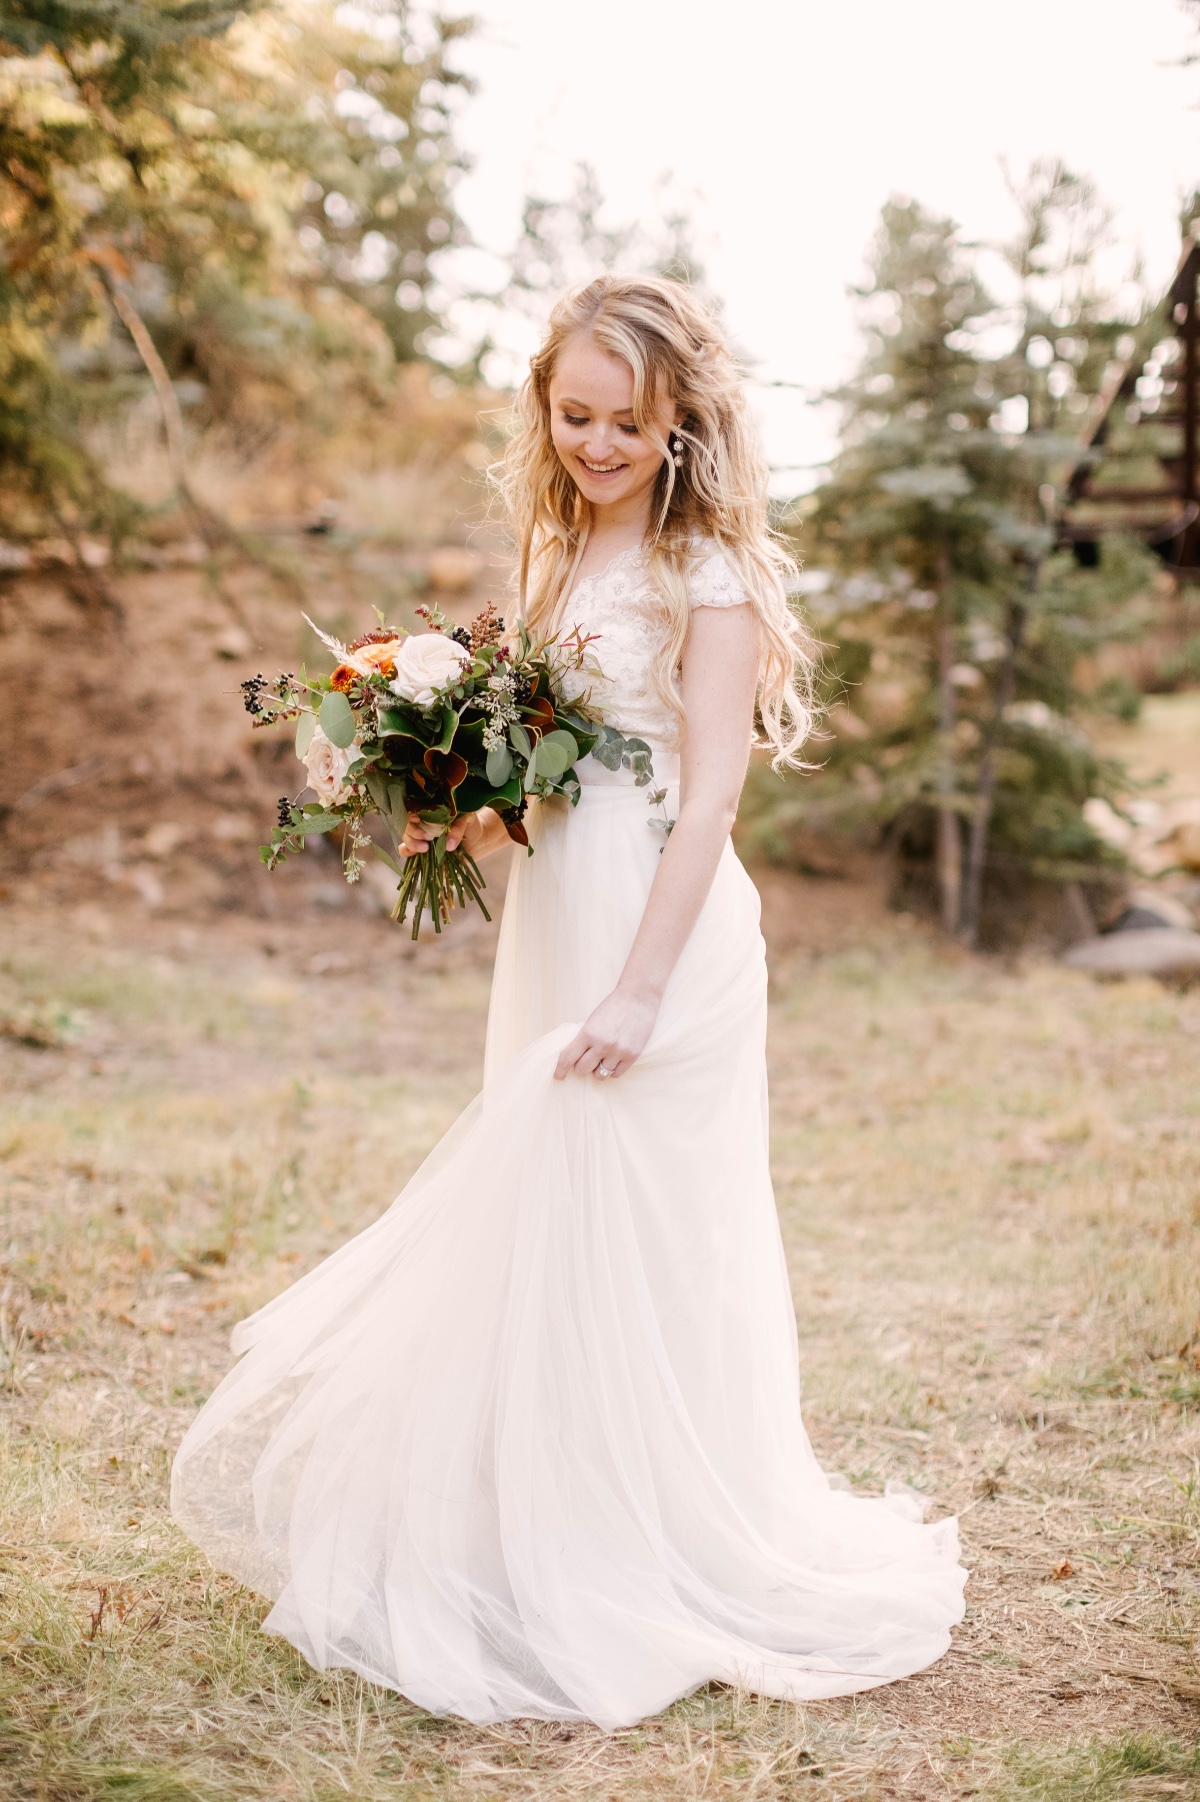 simple and sweet wedding dress from Watters